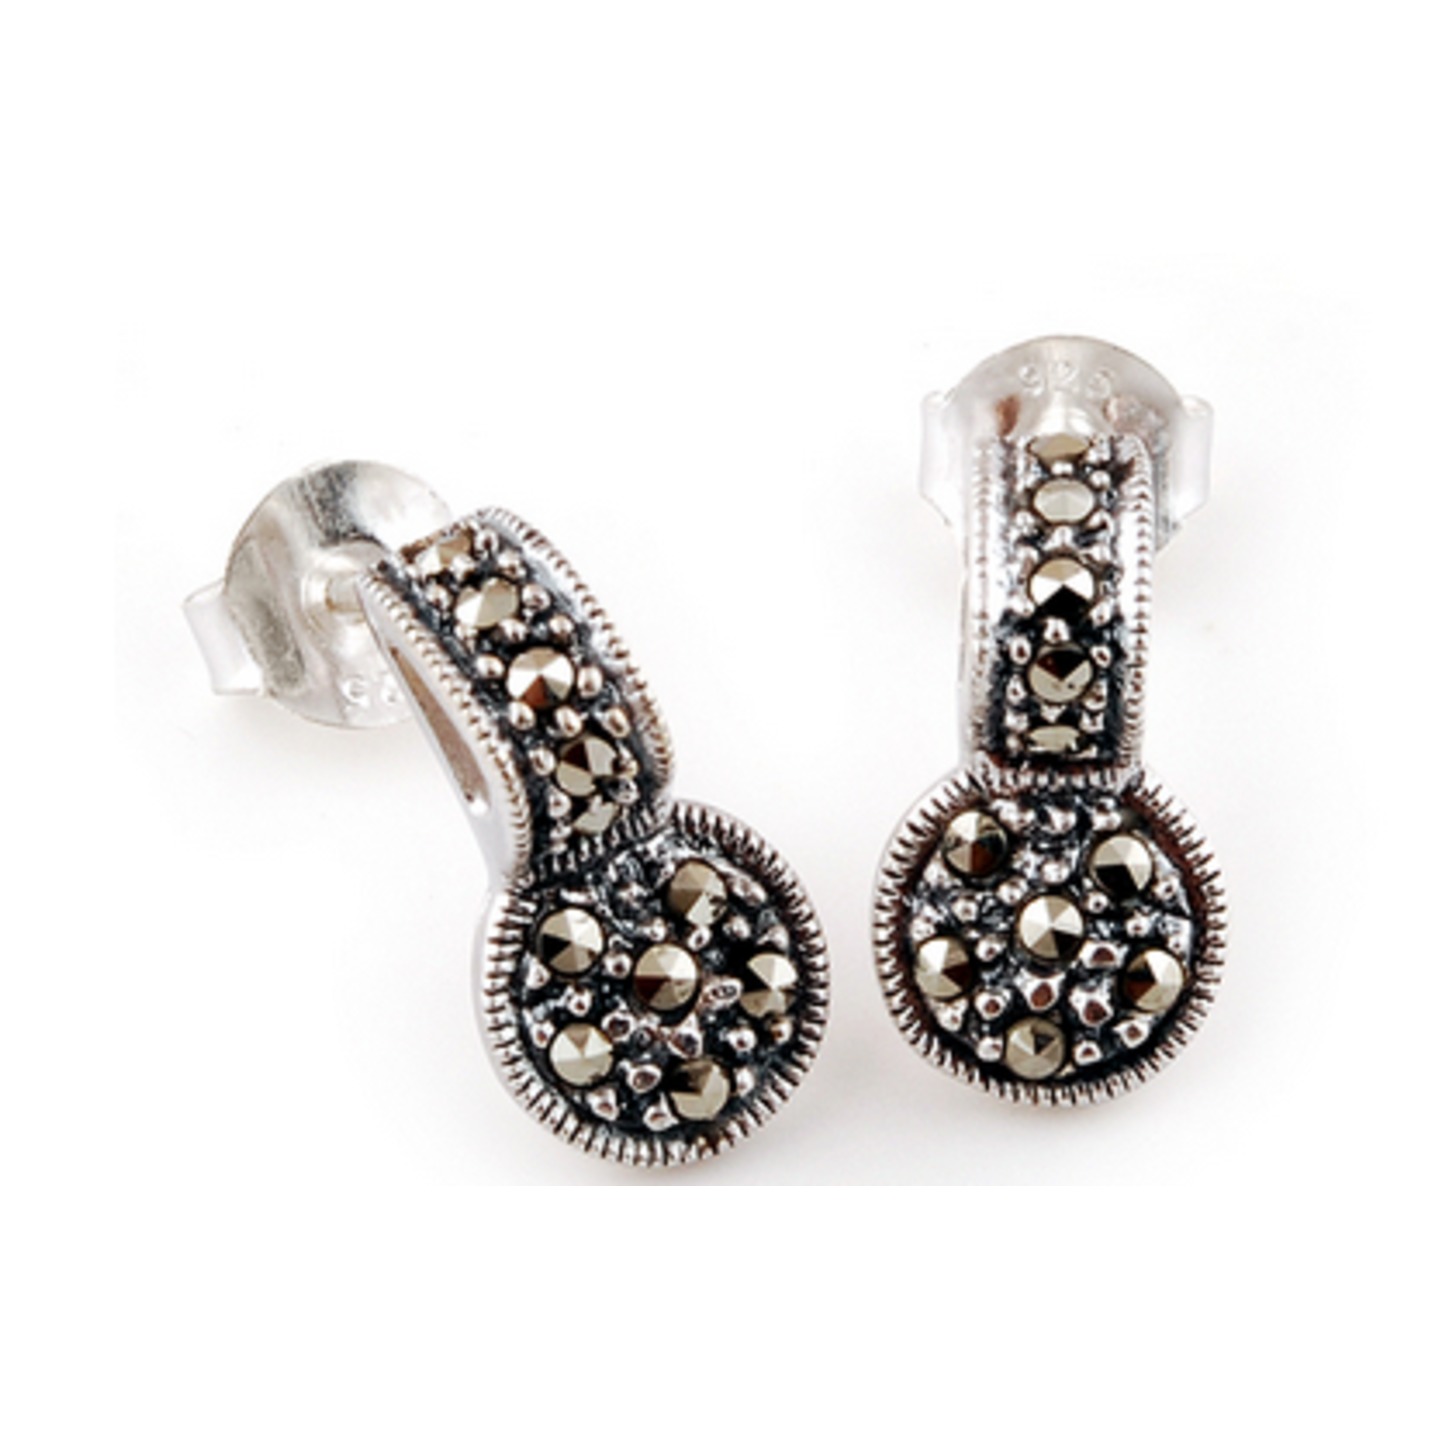 The Marcasite Silver Studs